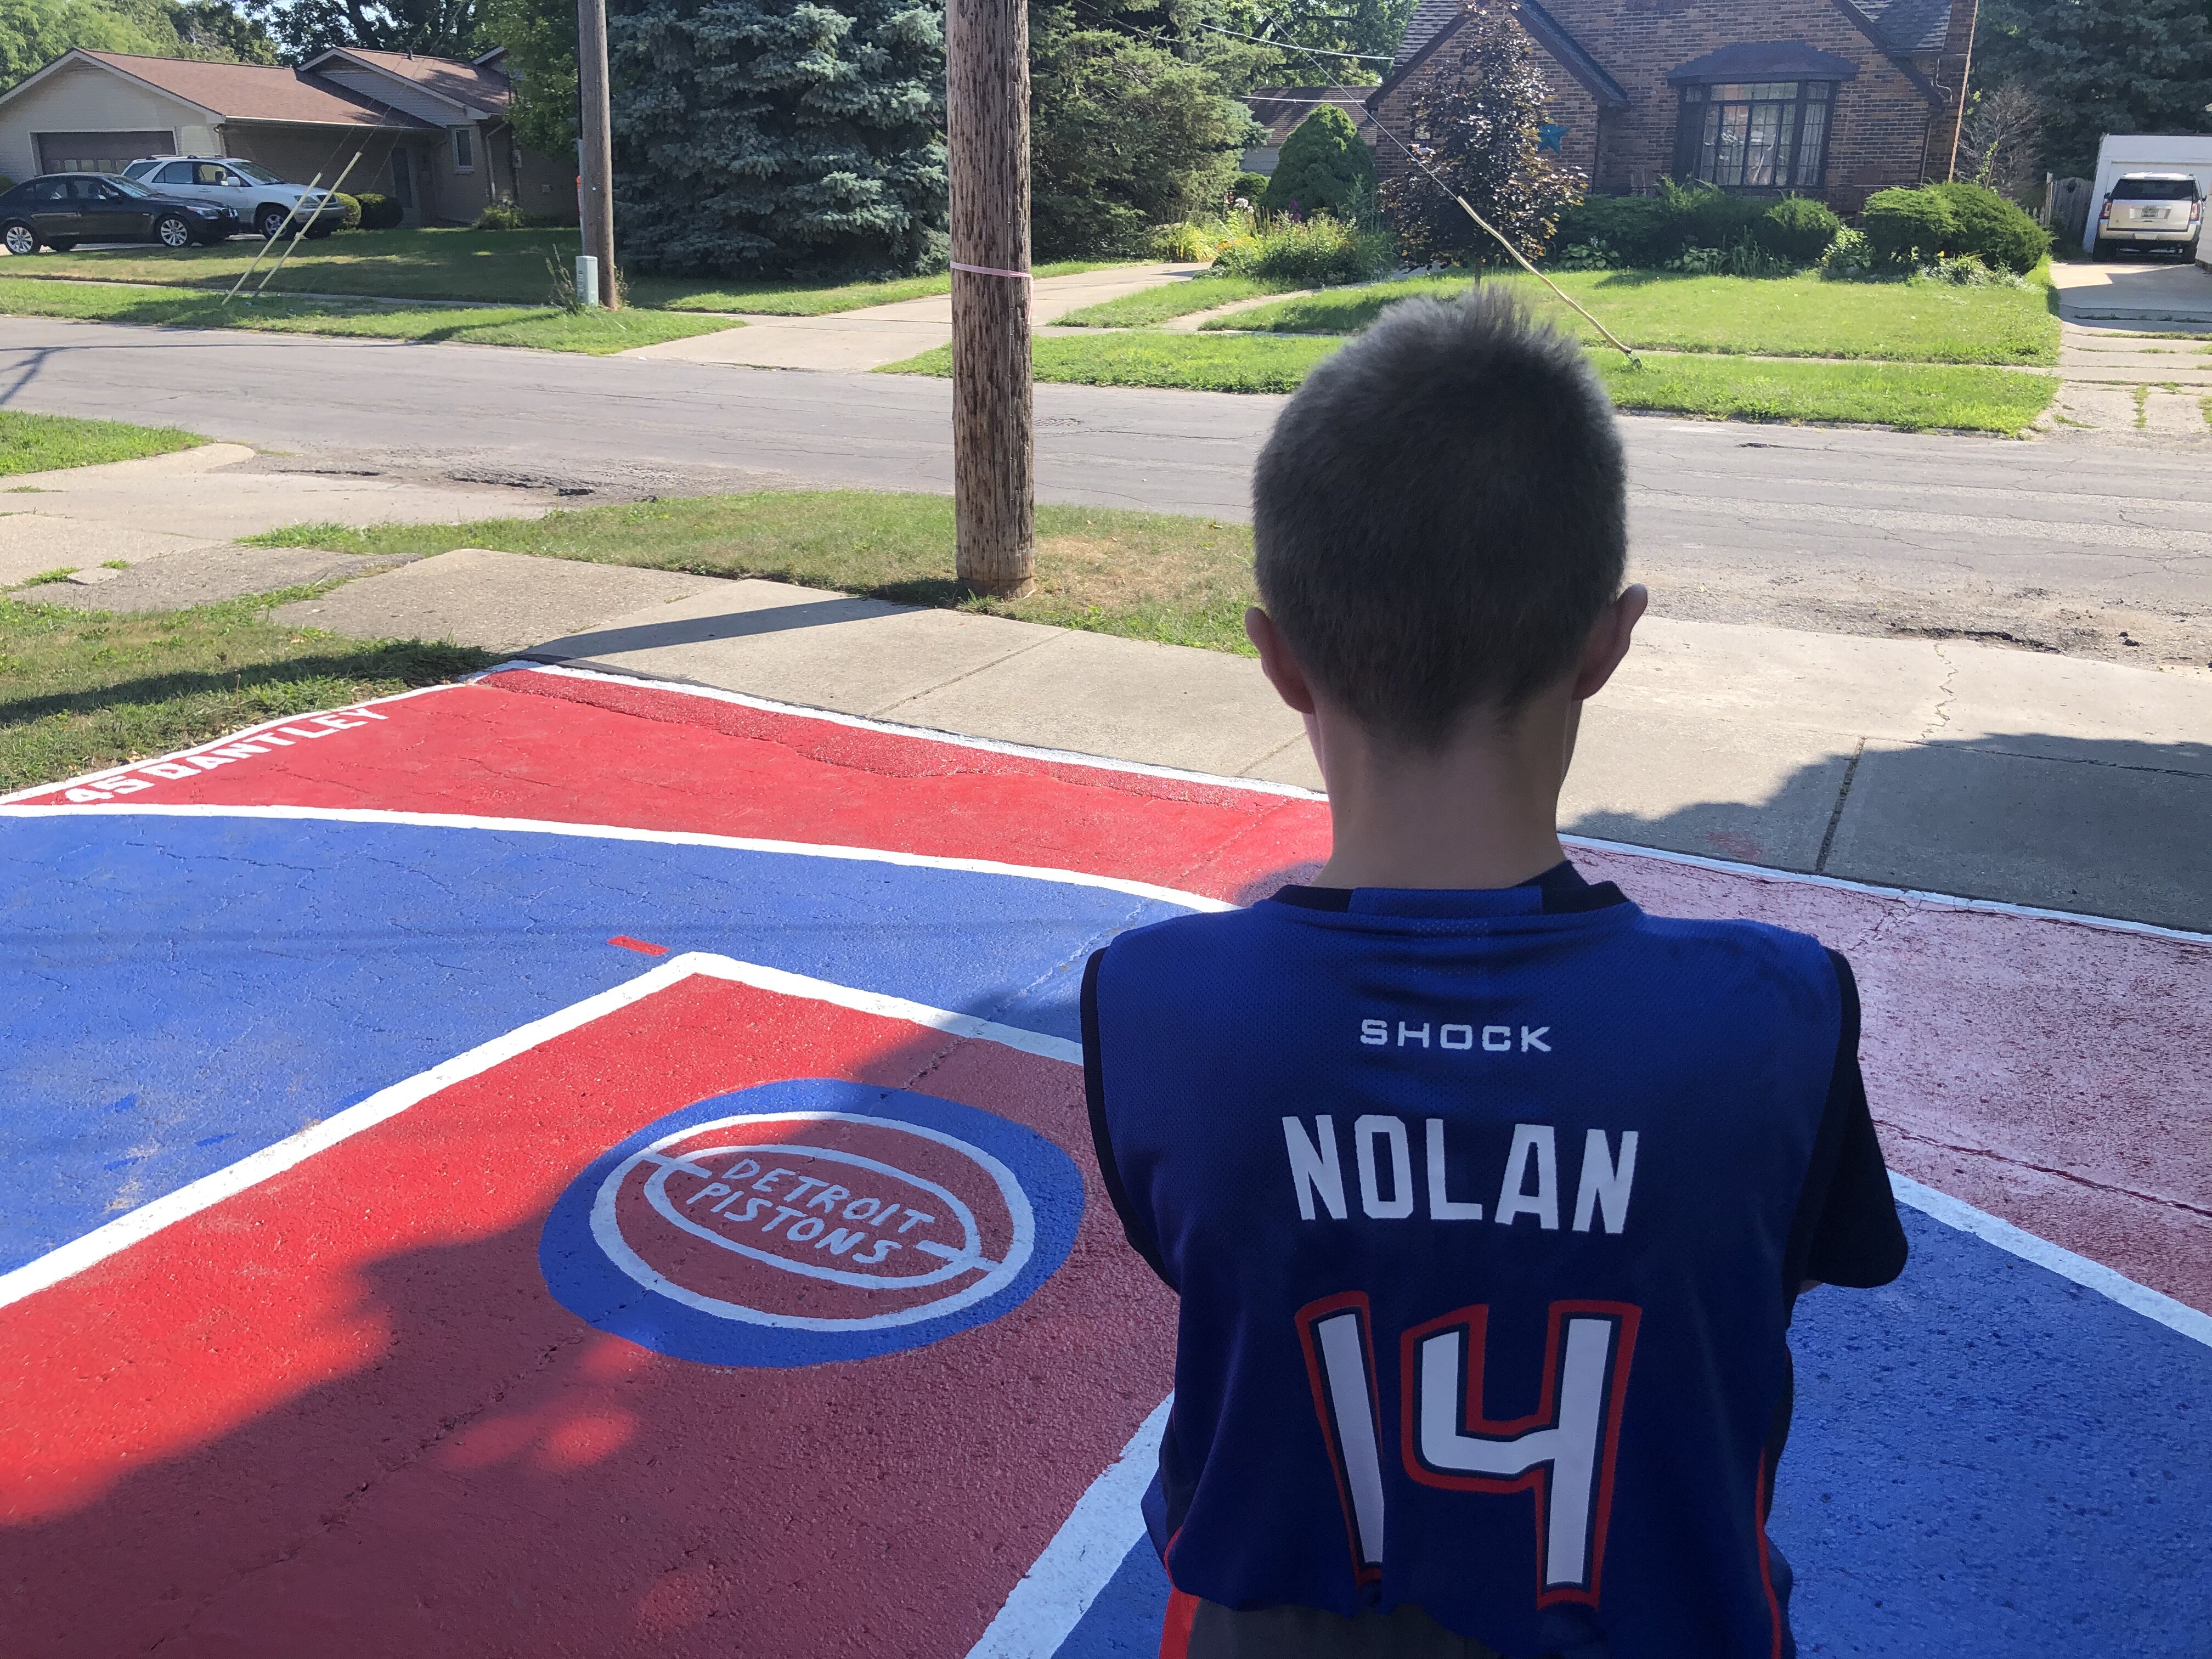 My son didn't ask for a LeBron James or Steph Curry jersey this year -- he asked for Deanna Nolan.